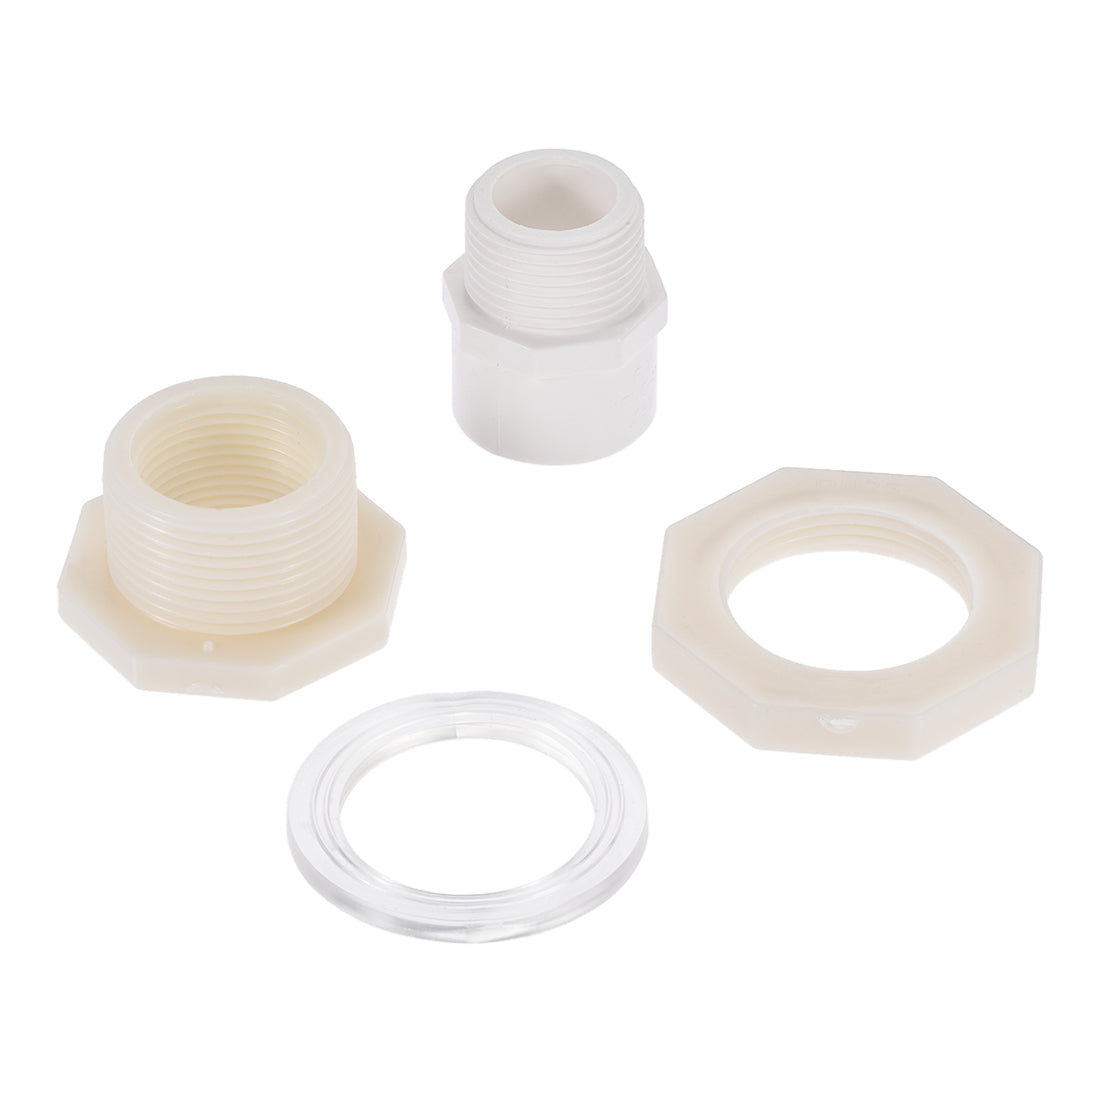 uxcell Uxcell Bulkhead Fitting, G1 Female 1.73" Male, Tube Adaptor Fitting, with Silicone Gasket and Pipe Connector, for Water Tanks, PVC, White